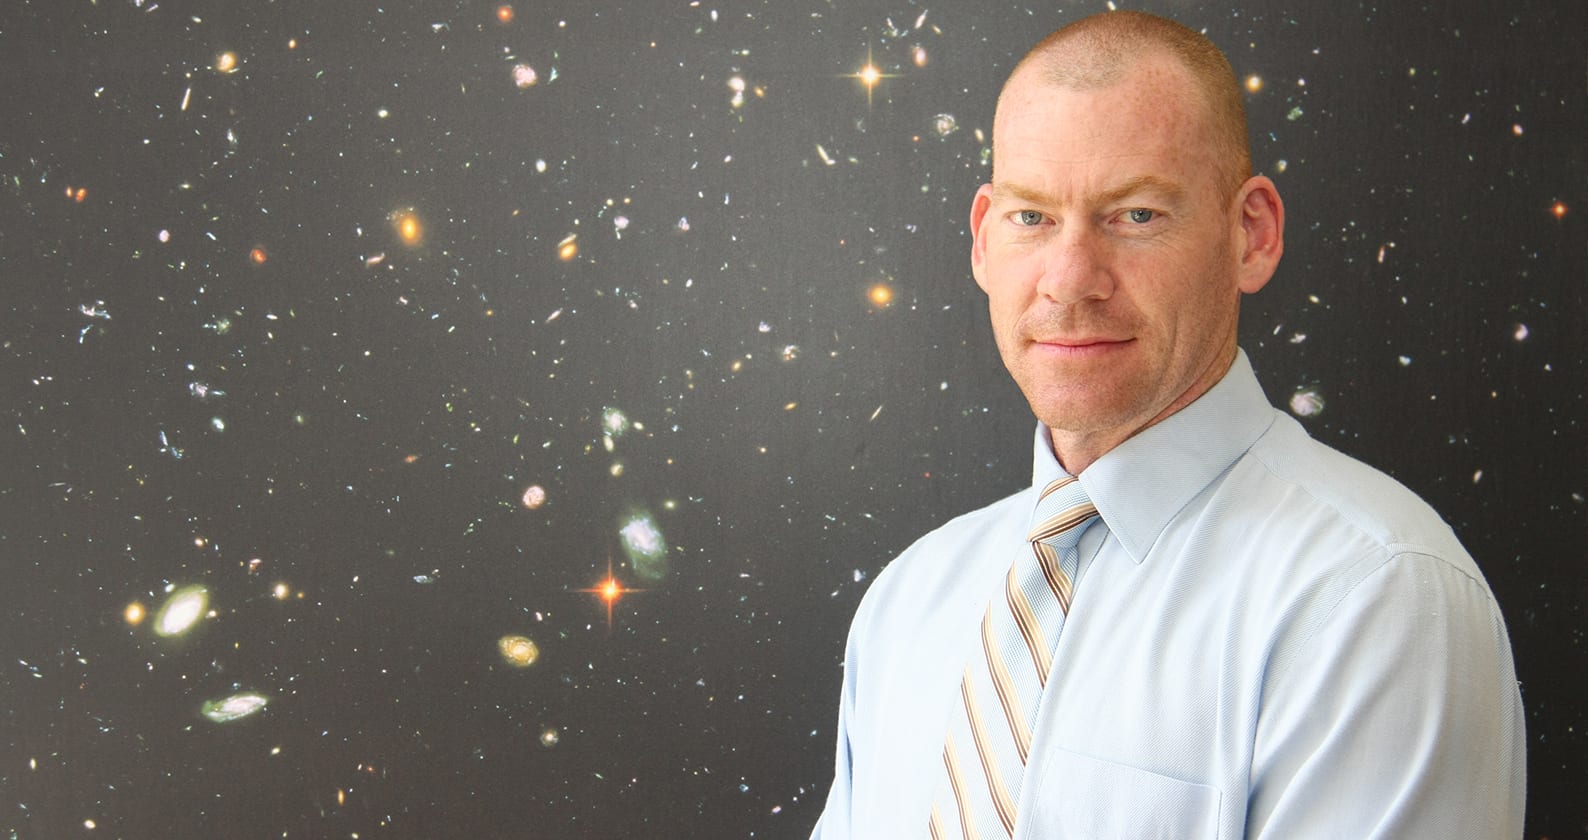 Image for Leading Curtin astronomer named joint Scientist of the Year 2020